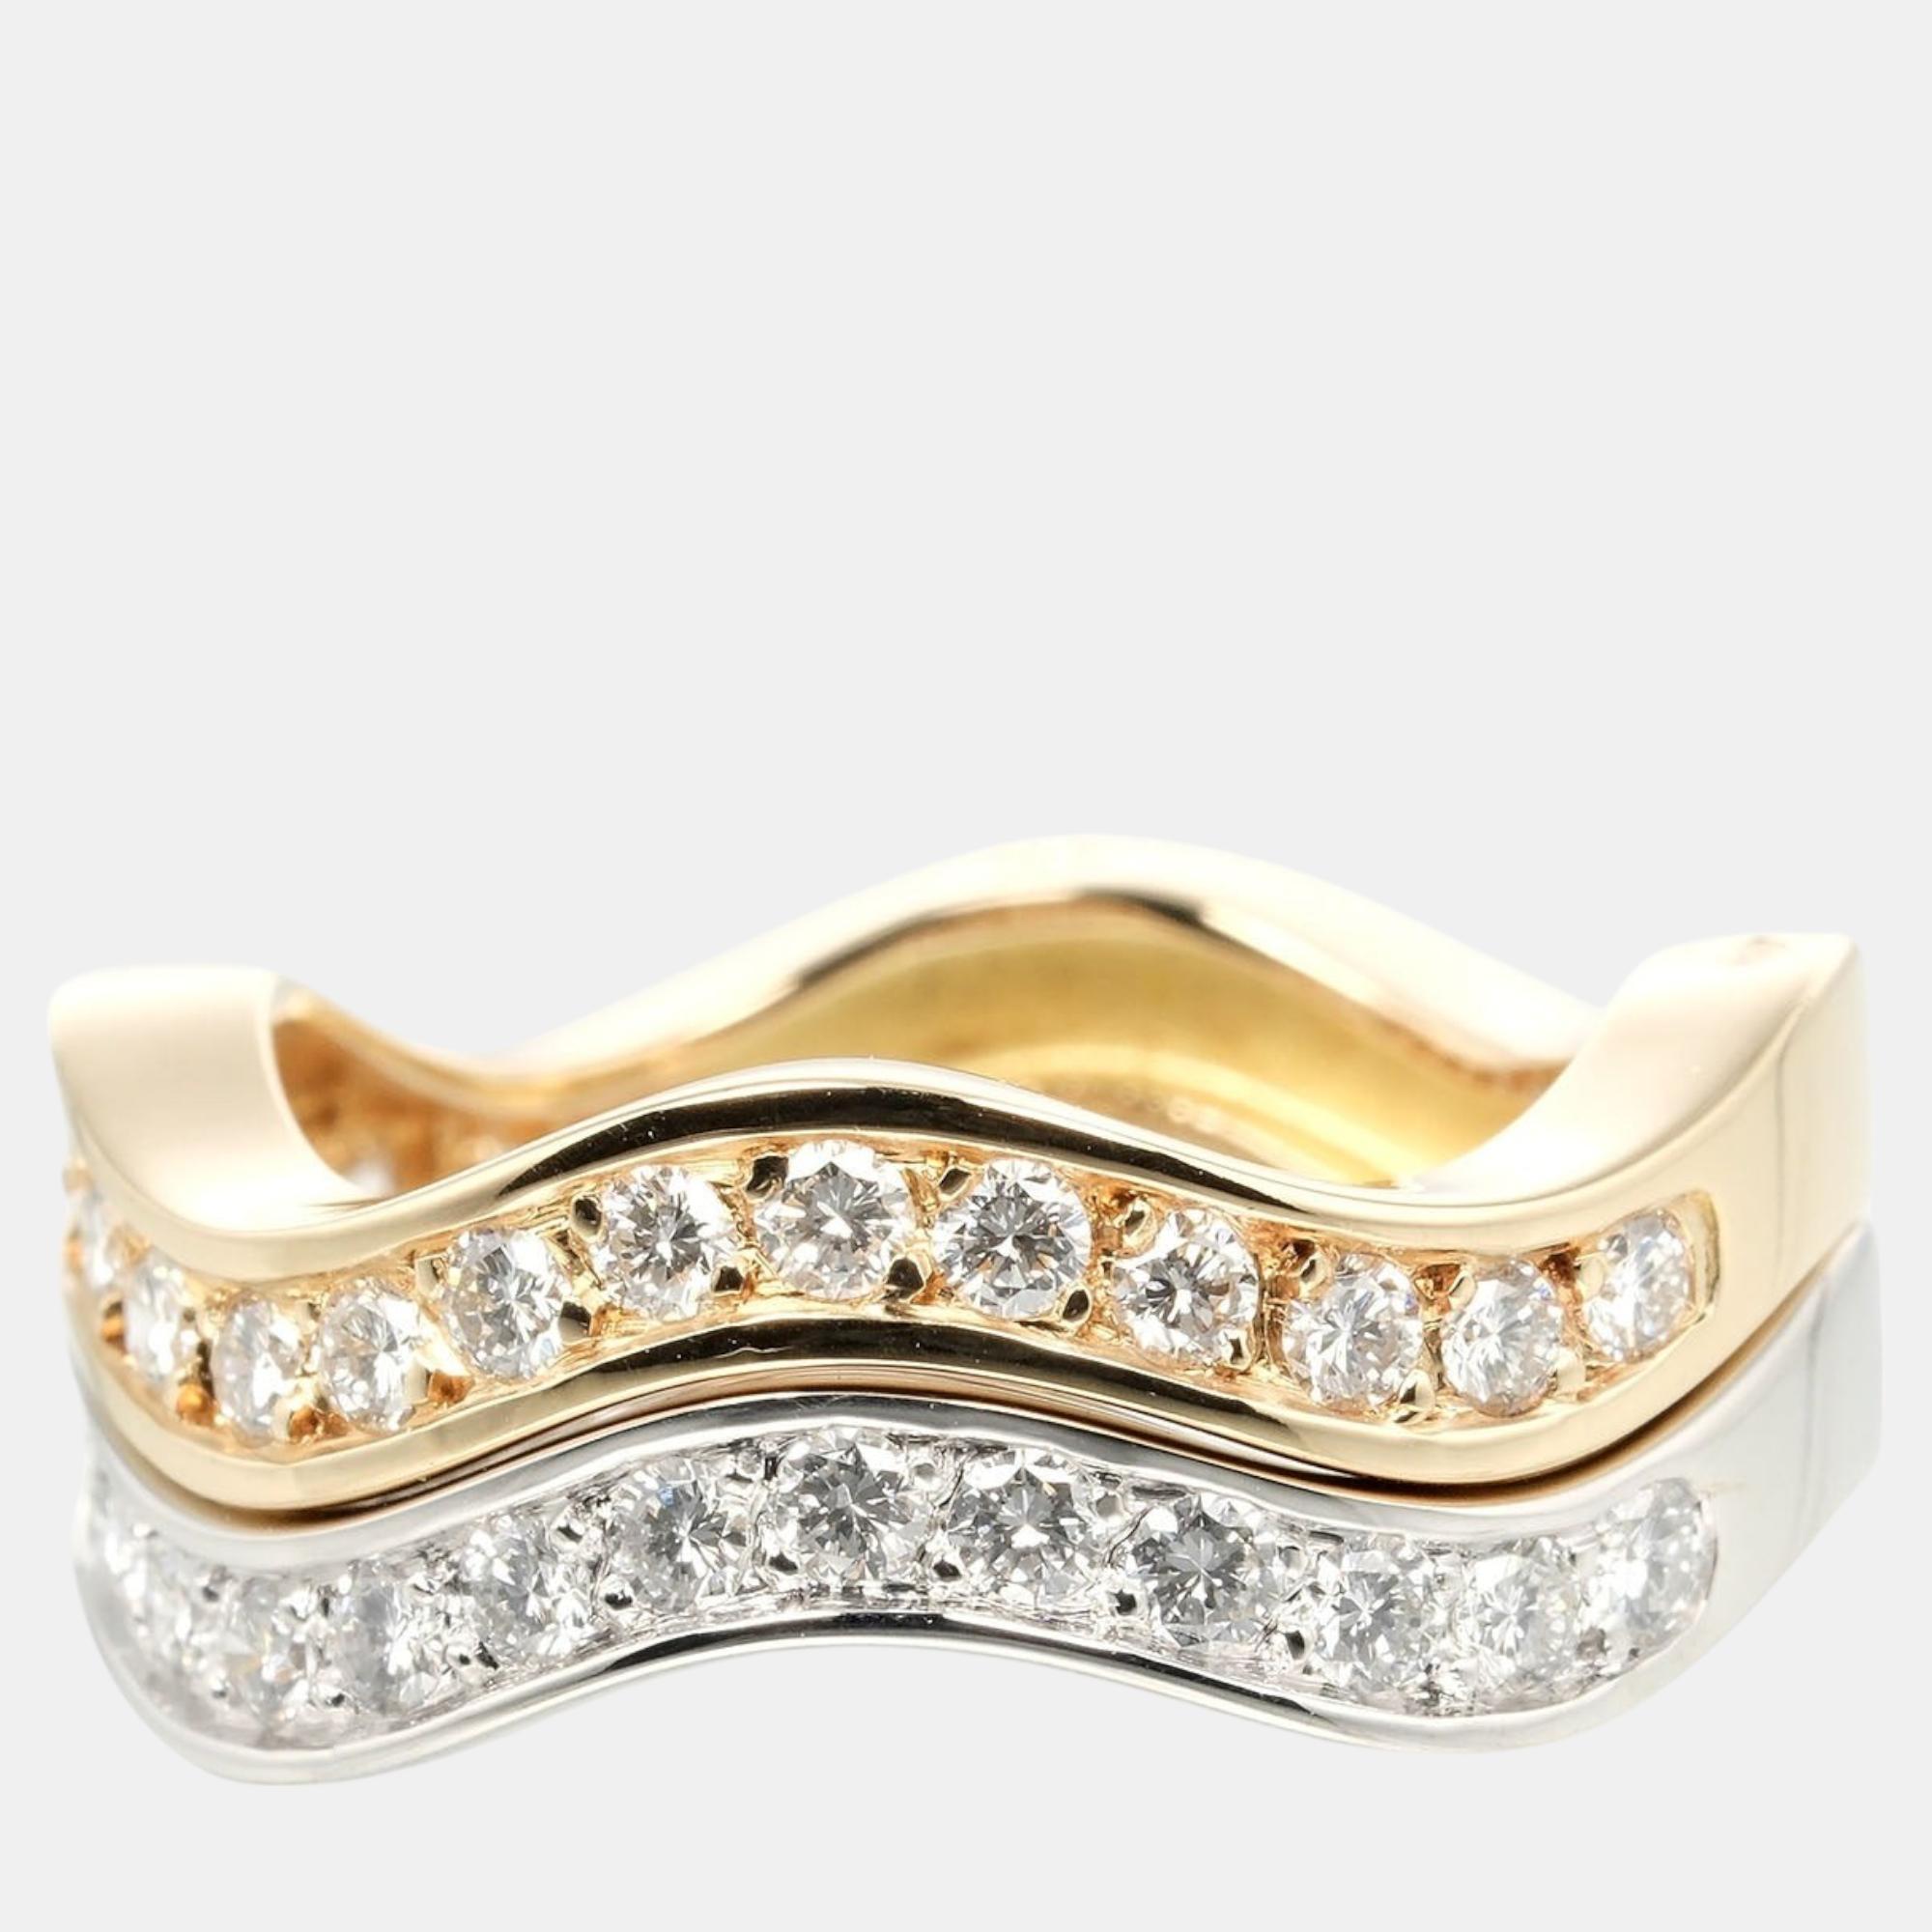 Experience the epitome of luxury and craftsmanship with this meticulously designed fine jewelry ring. Its timeless elegance and exceptional detailing make it a statement piece for any occasion.